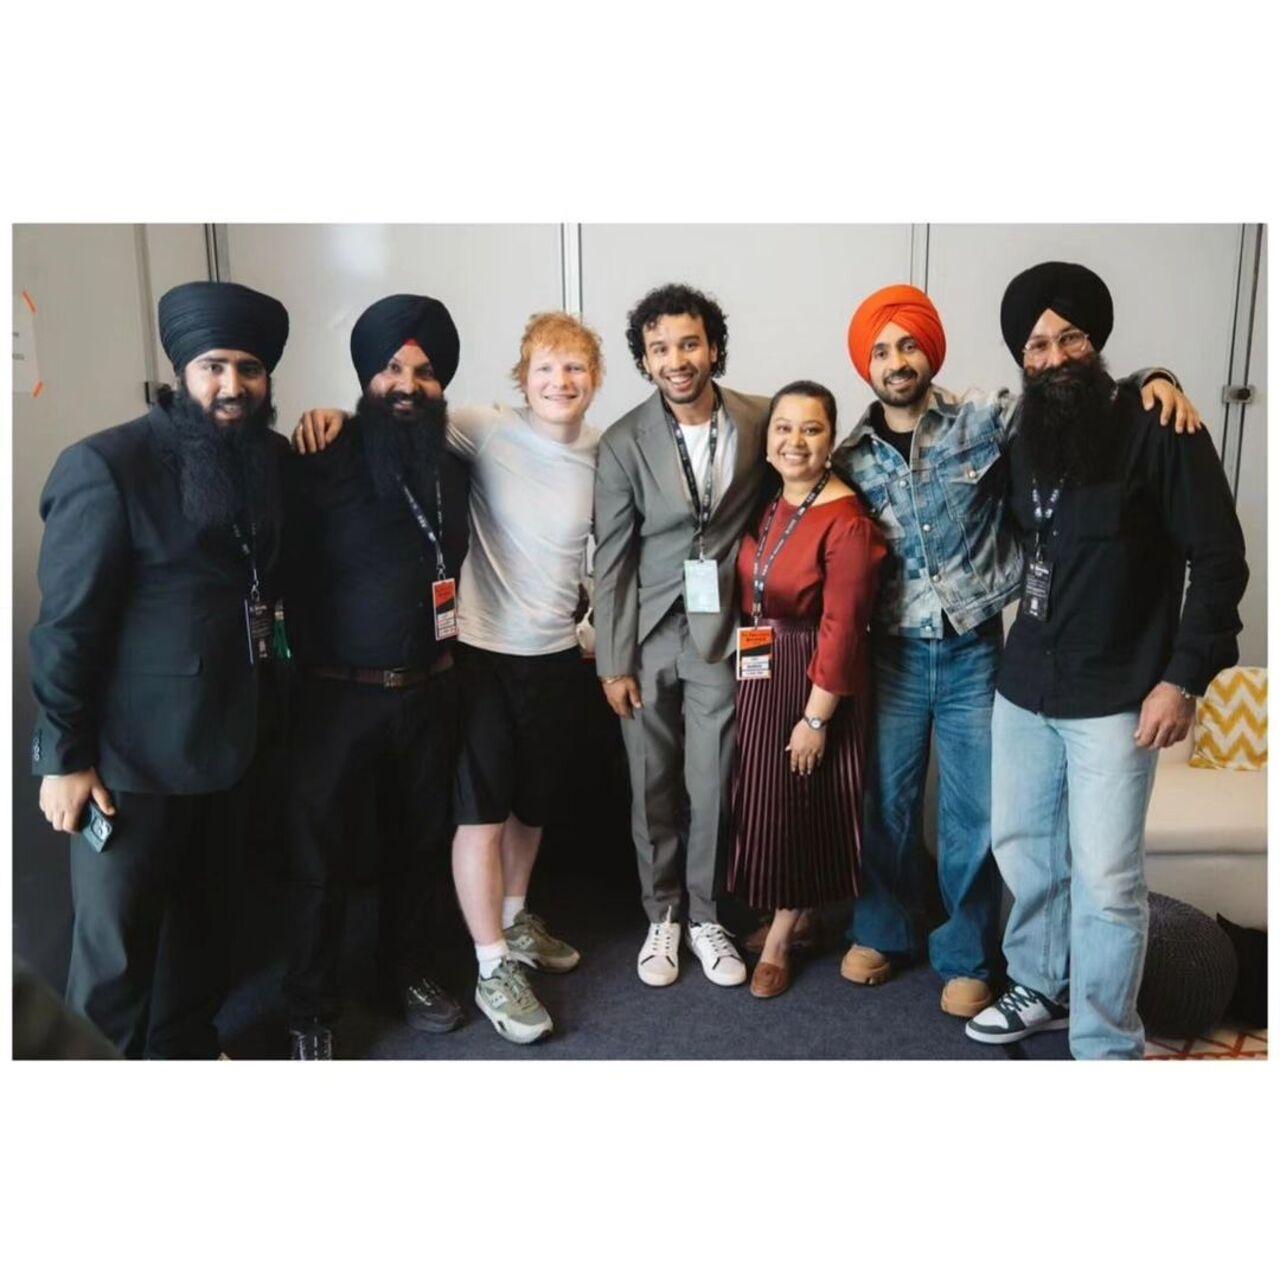 Ed Sheeran poses with Diljit and his team backstage